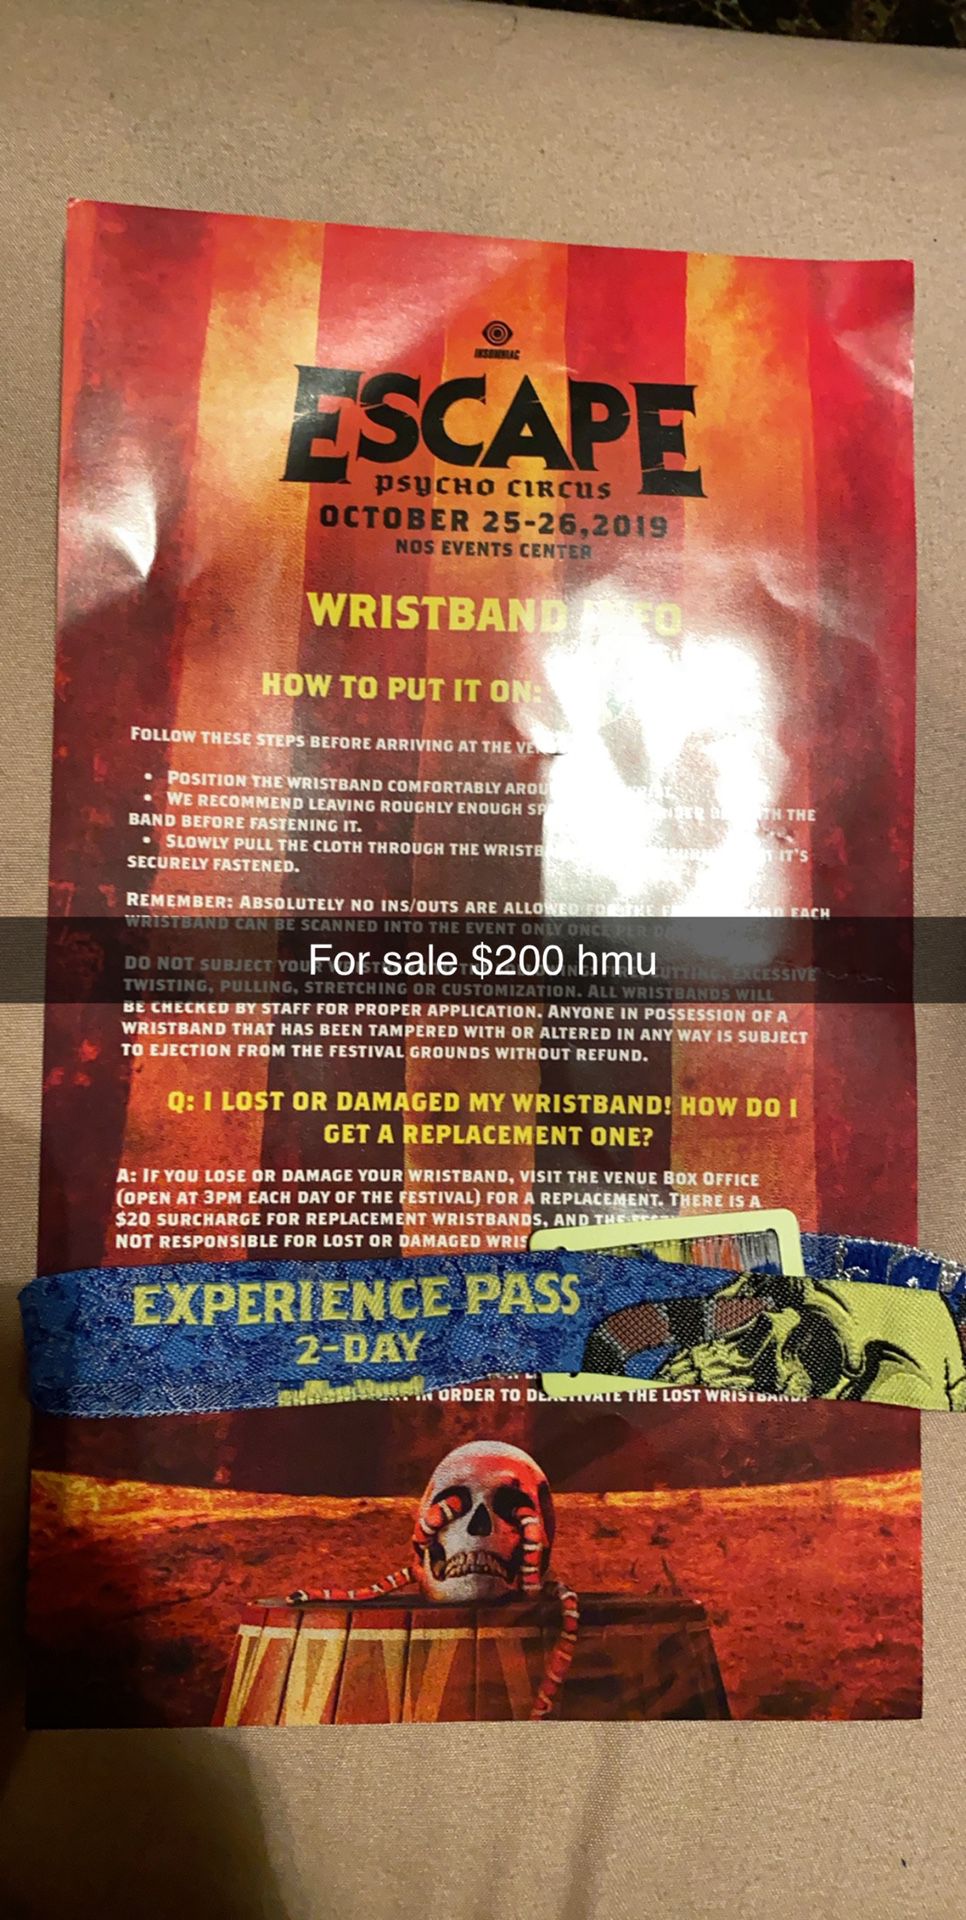 Escape psycho circus tickets for October 25-26